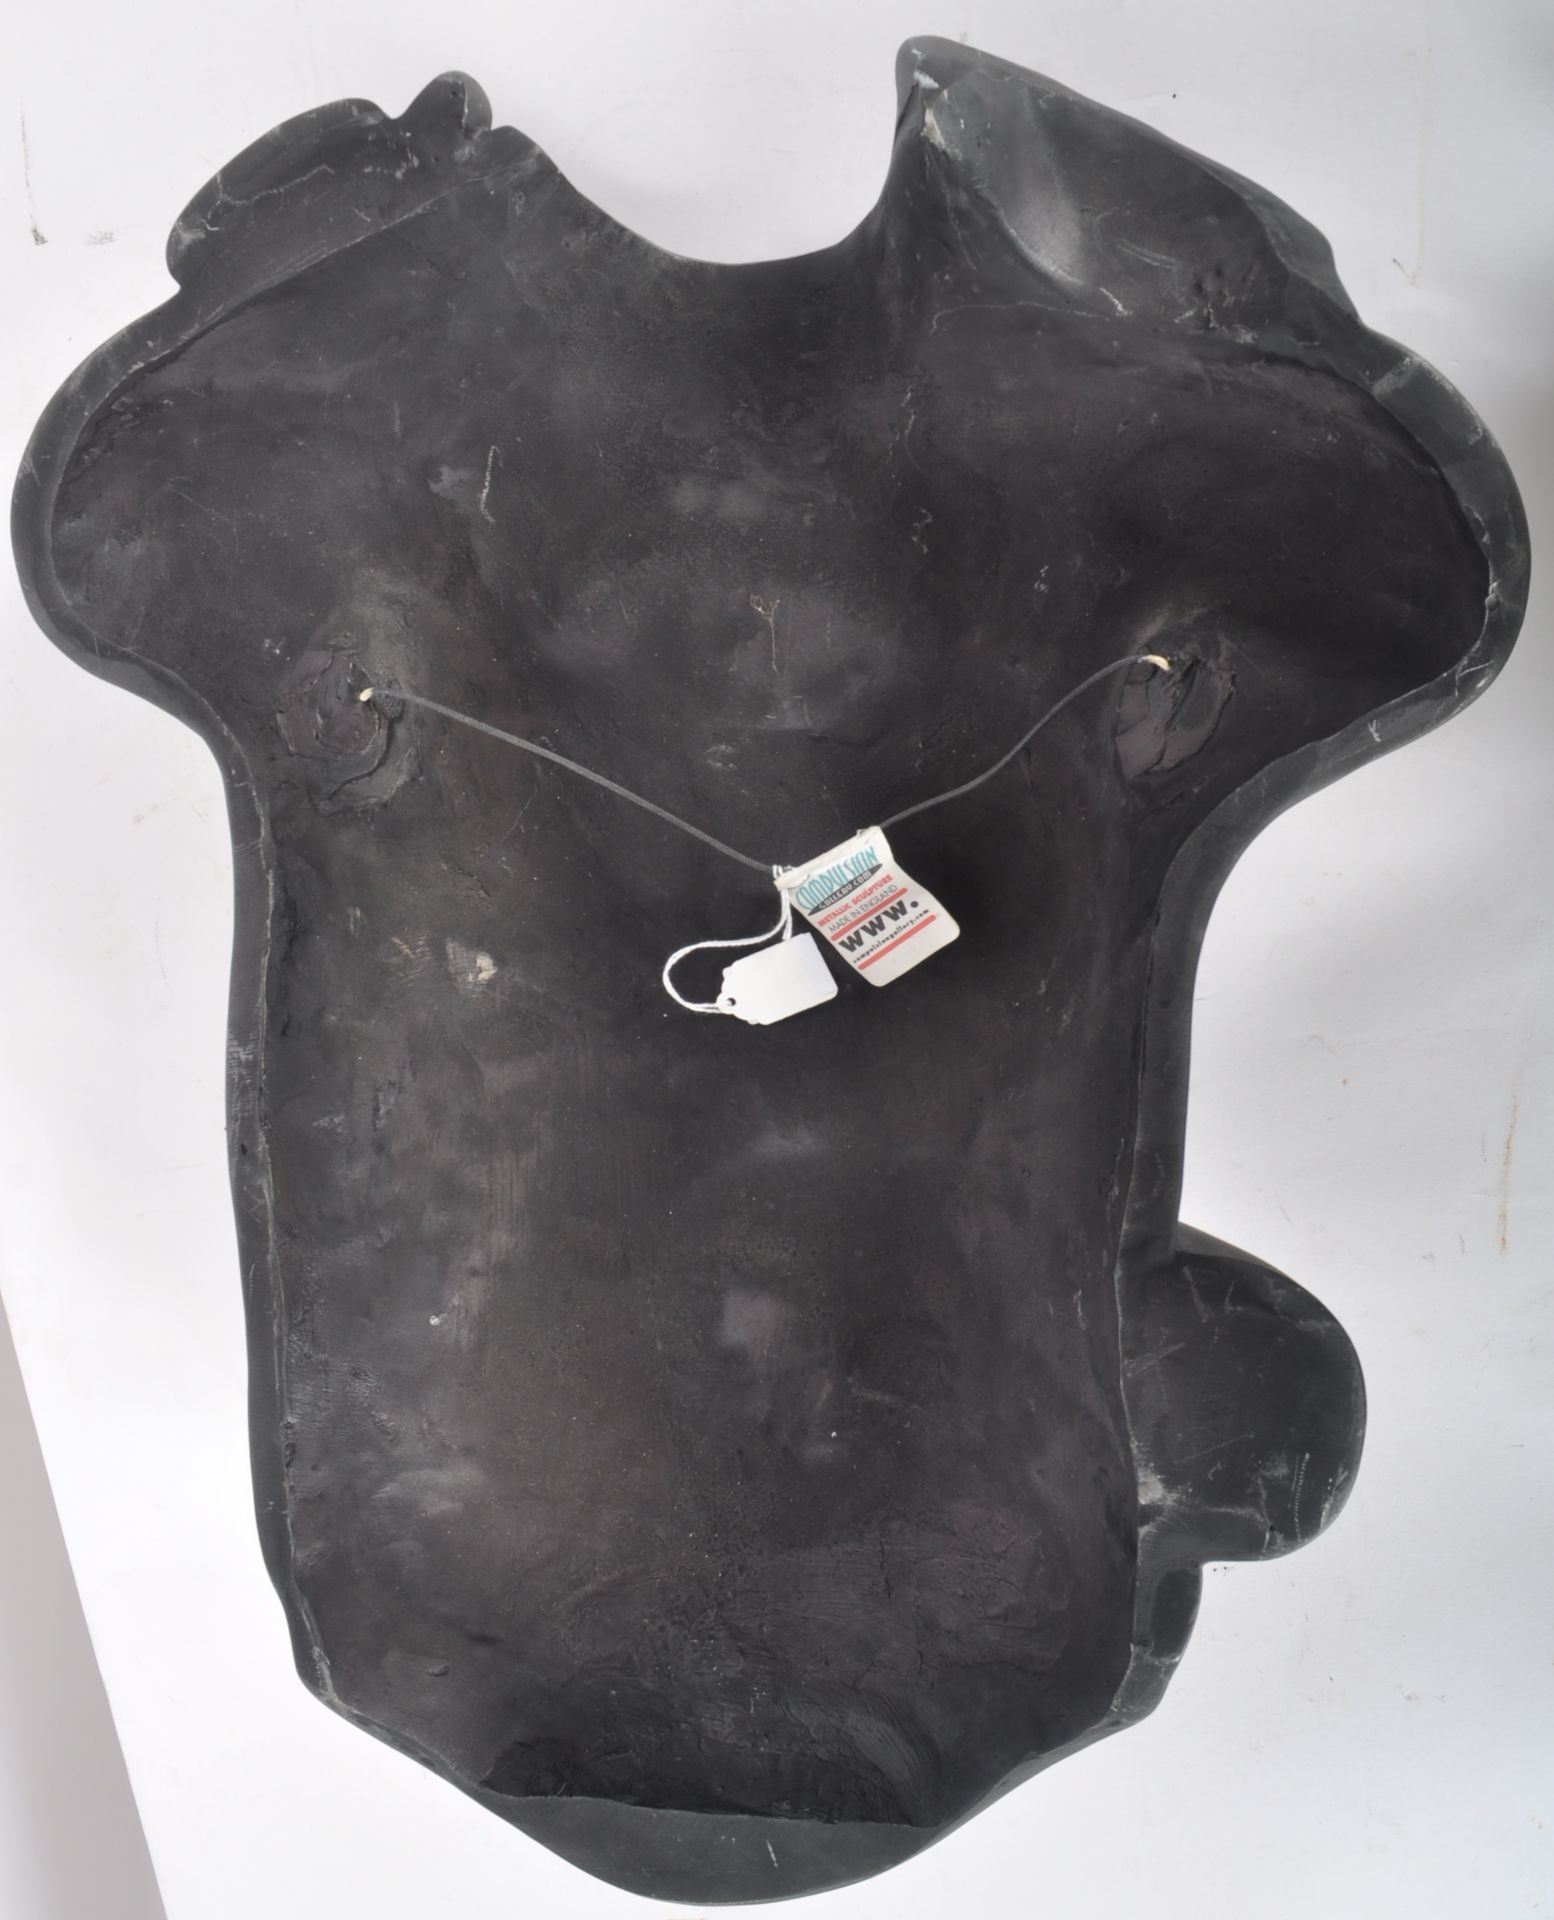 COMPULSION GALLERY - PEWTER TORSO WITH NOTATION - Image 10 of 10